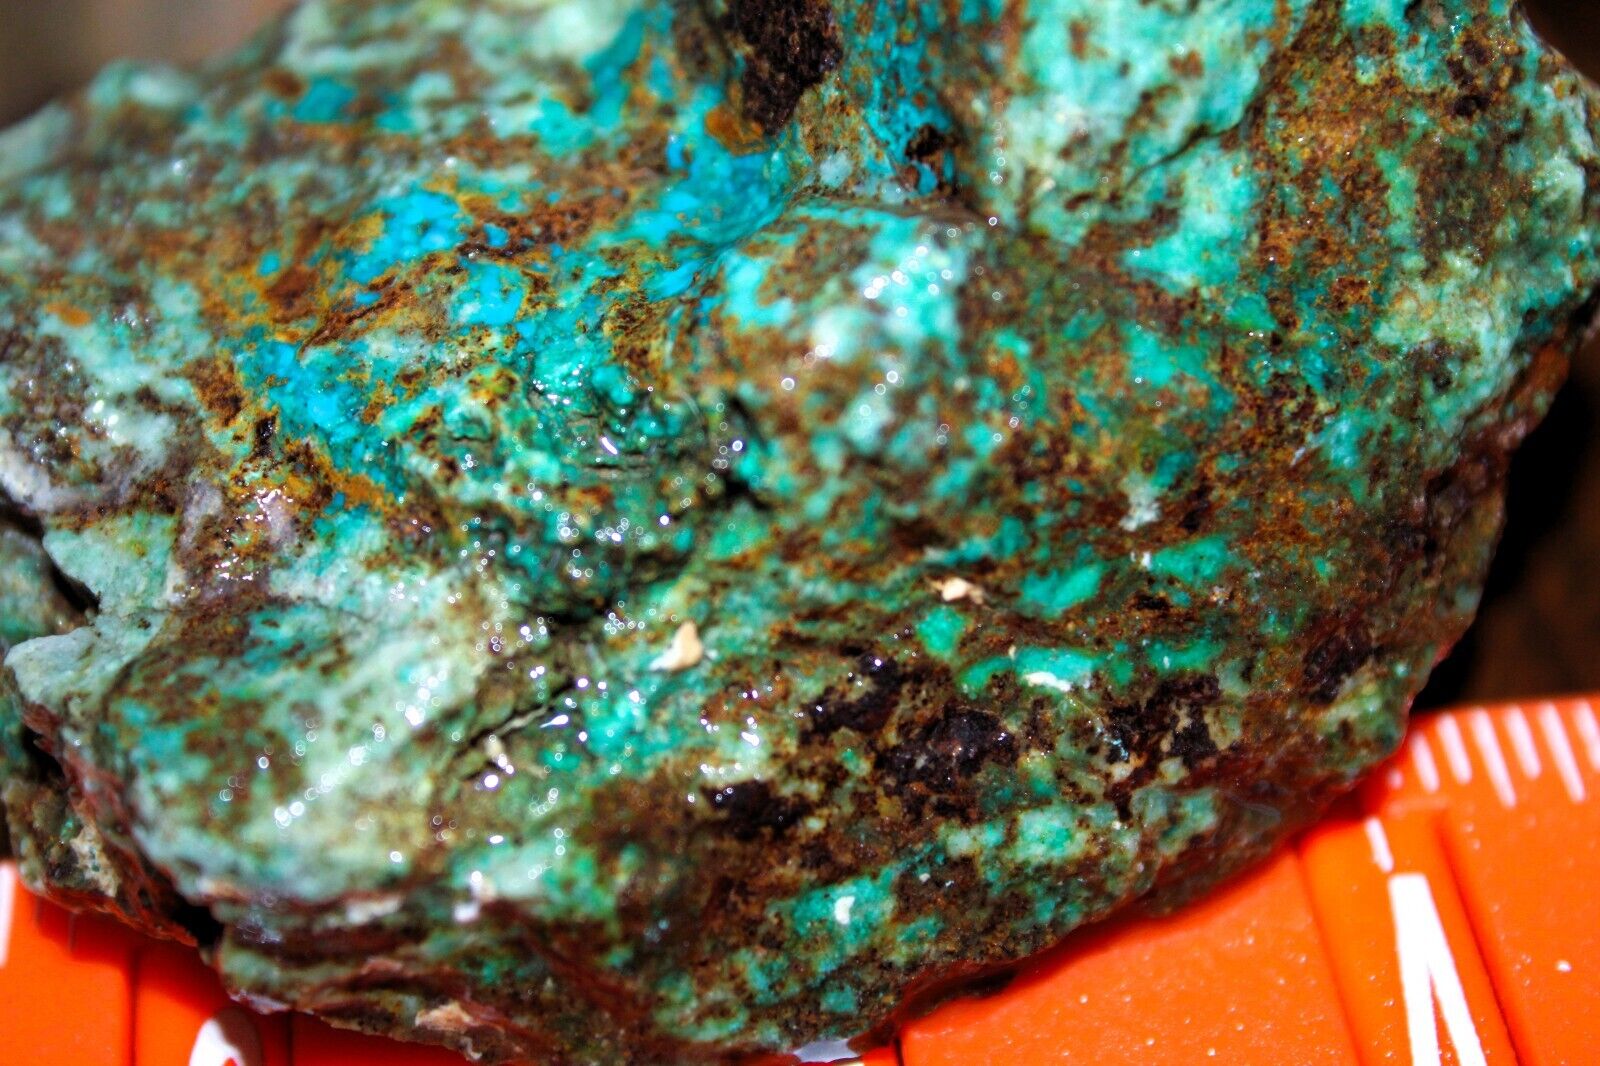 Pilot Mountain Area Turquoise Blue/Green Rough & Raw Mineral Co. Nevada 192g